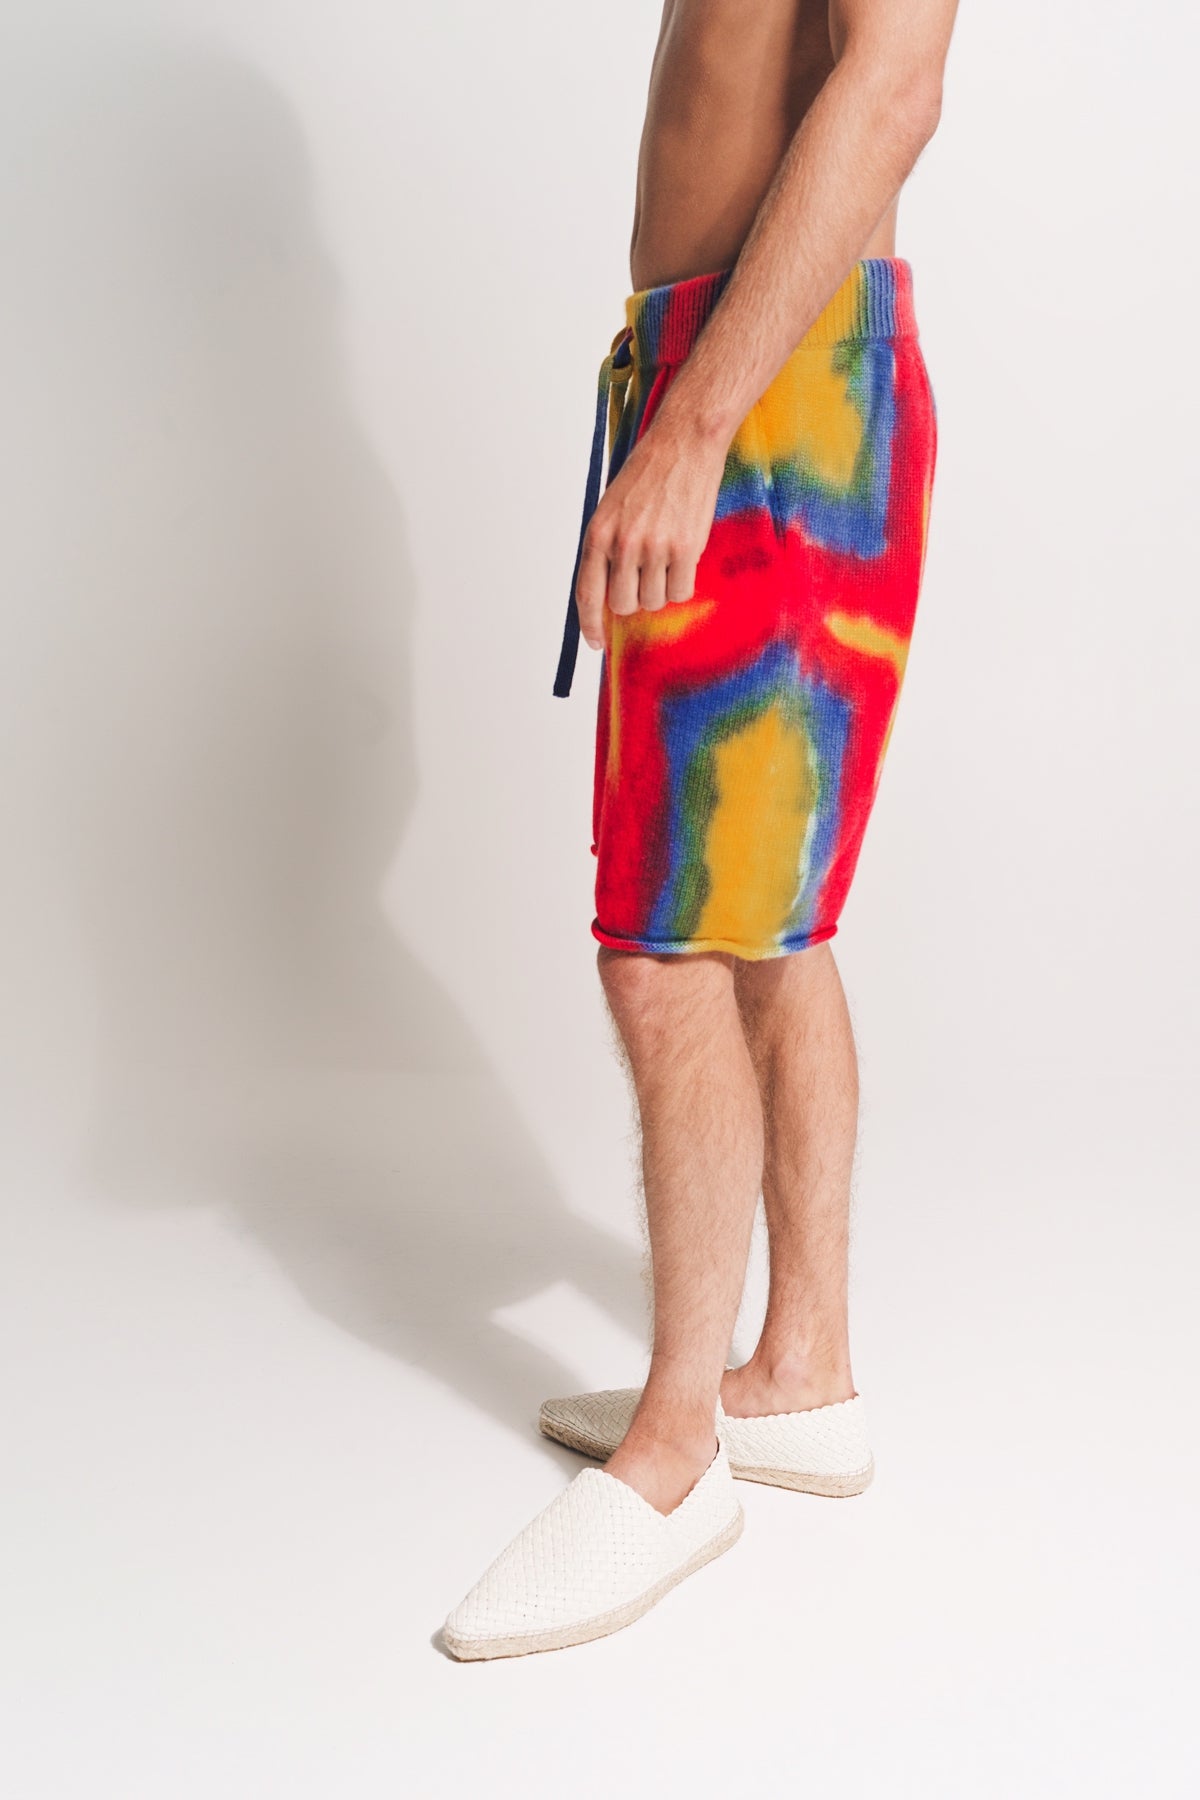 THE ELDER STATESMAN | PAINTED FLORAL SHORTS